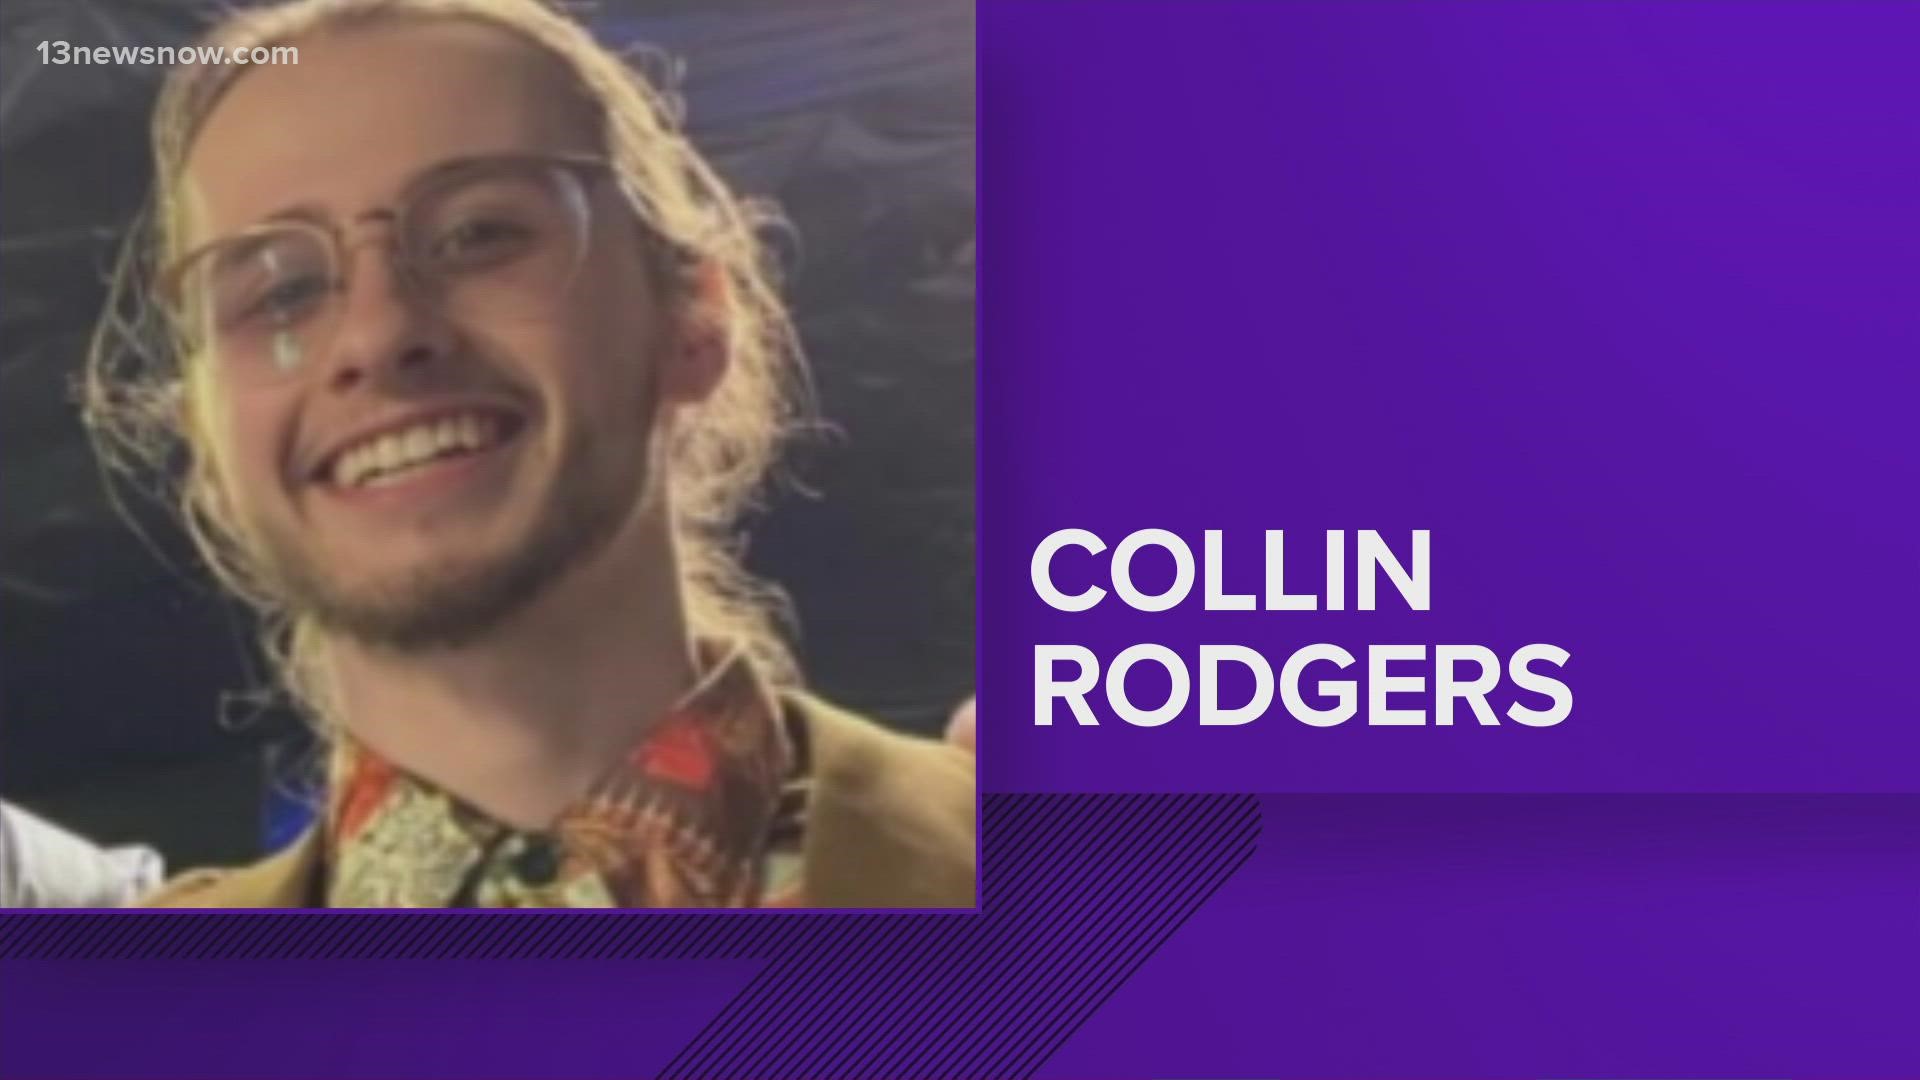 Virginia Beach Police say Collin Rodgers' family has not seen or heard from him since March 27. He is the brother of one of the victims in a recent double homicide.